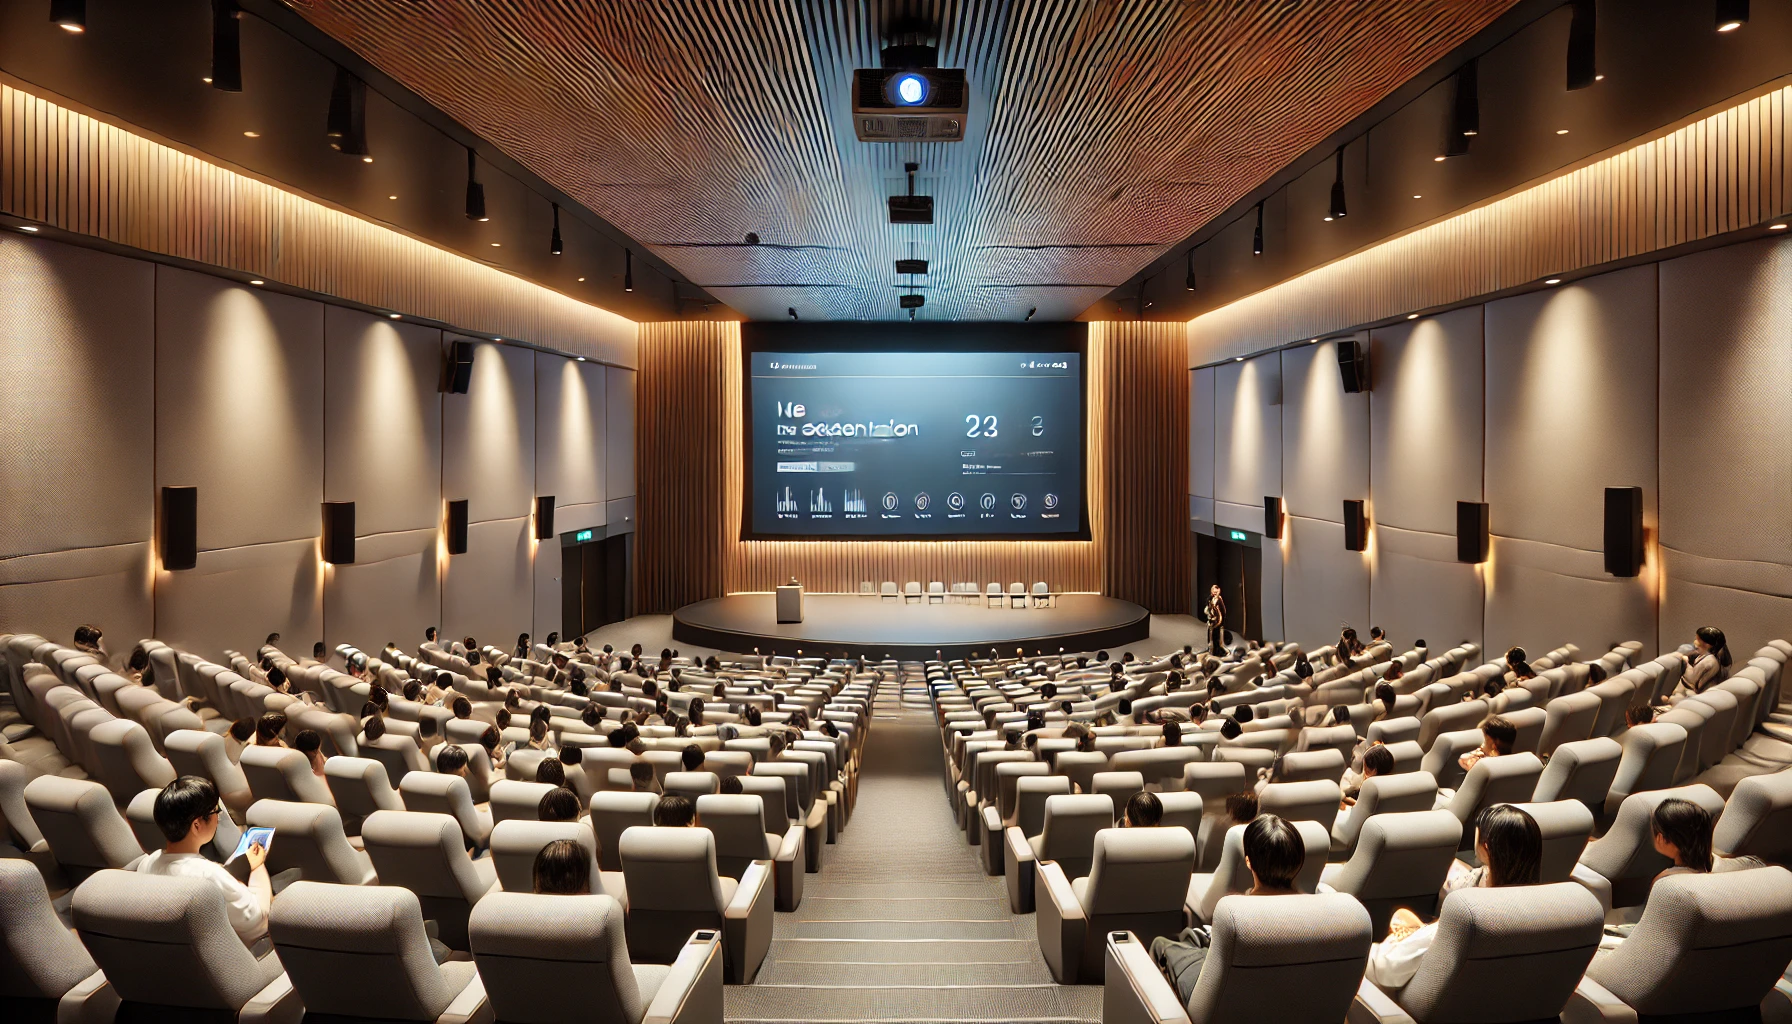 DALL·E 2024 07 27 11.19.35 An auditorium with rows of seats facing a large projector screen at the front. The screen is lit up with a presentation and the projector is position